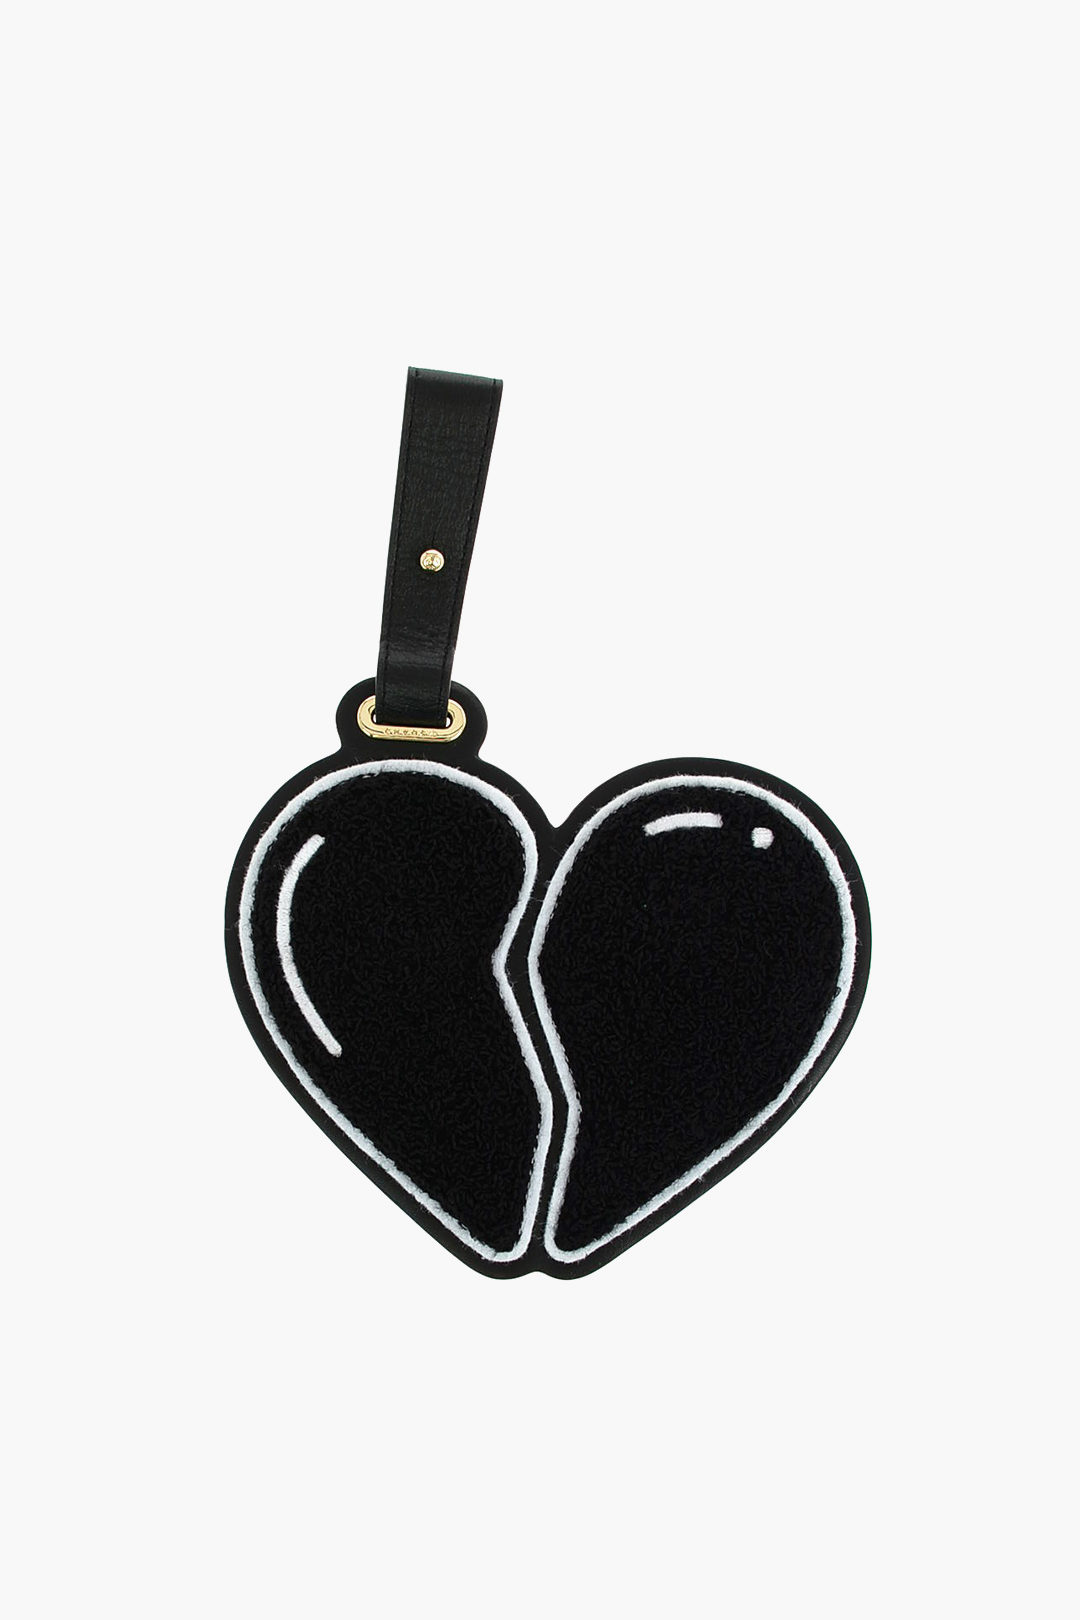 leather and fabric BROKEN HEART Bag Charm